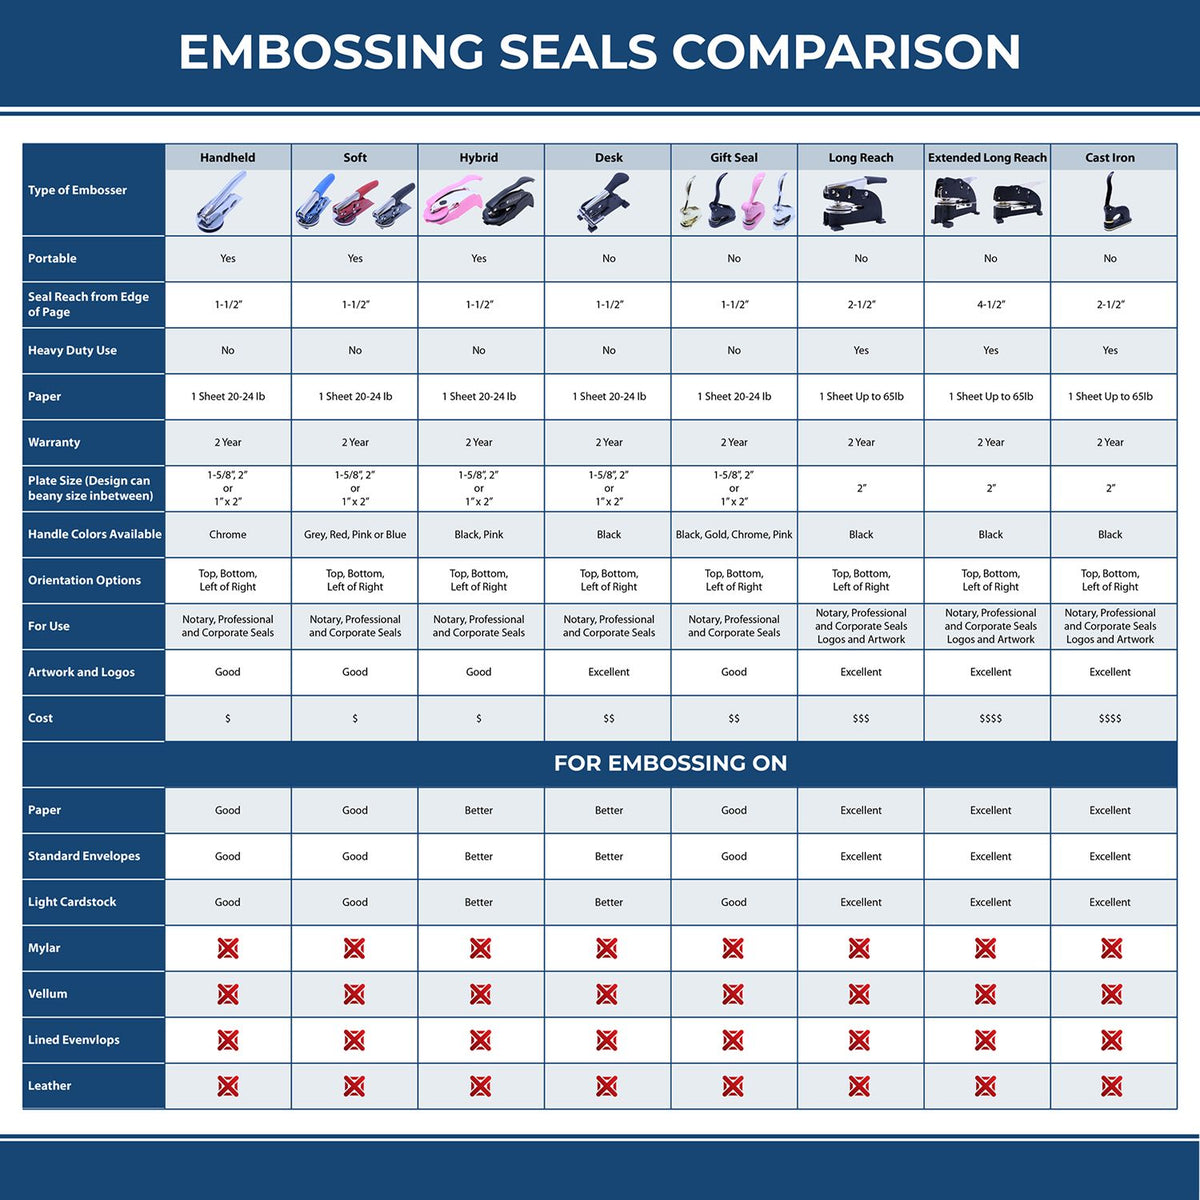 A comparison chart for the different types of mount models available for the Soft Louisiana Professional Geologist Seal